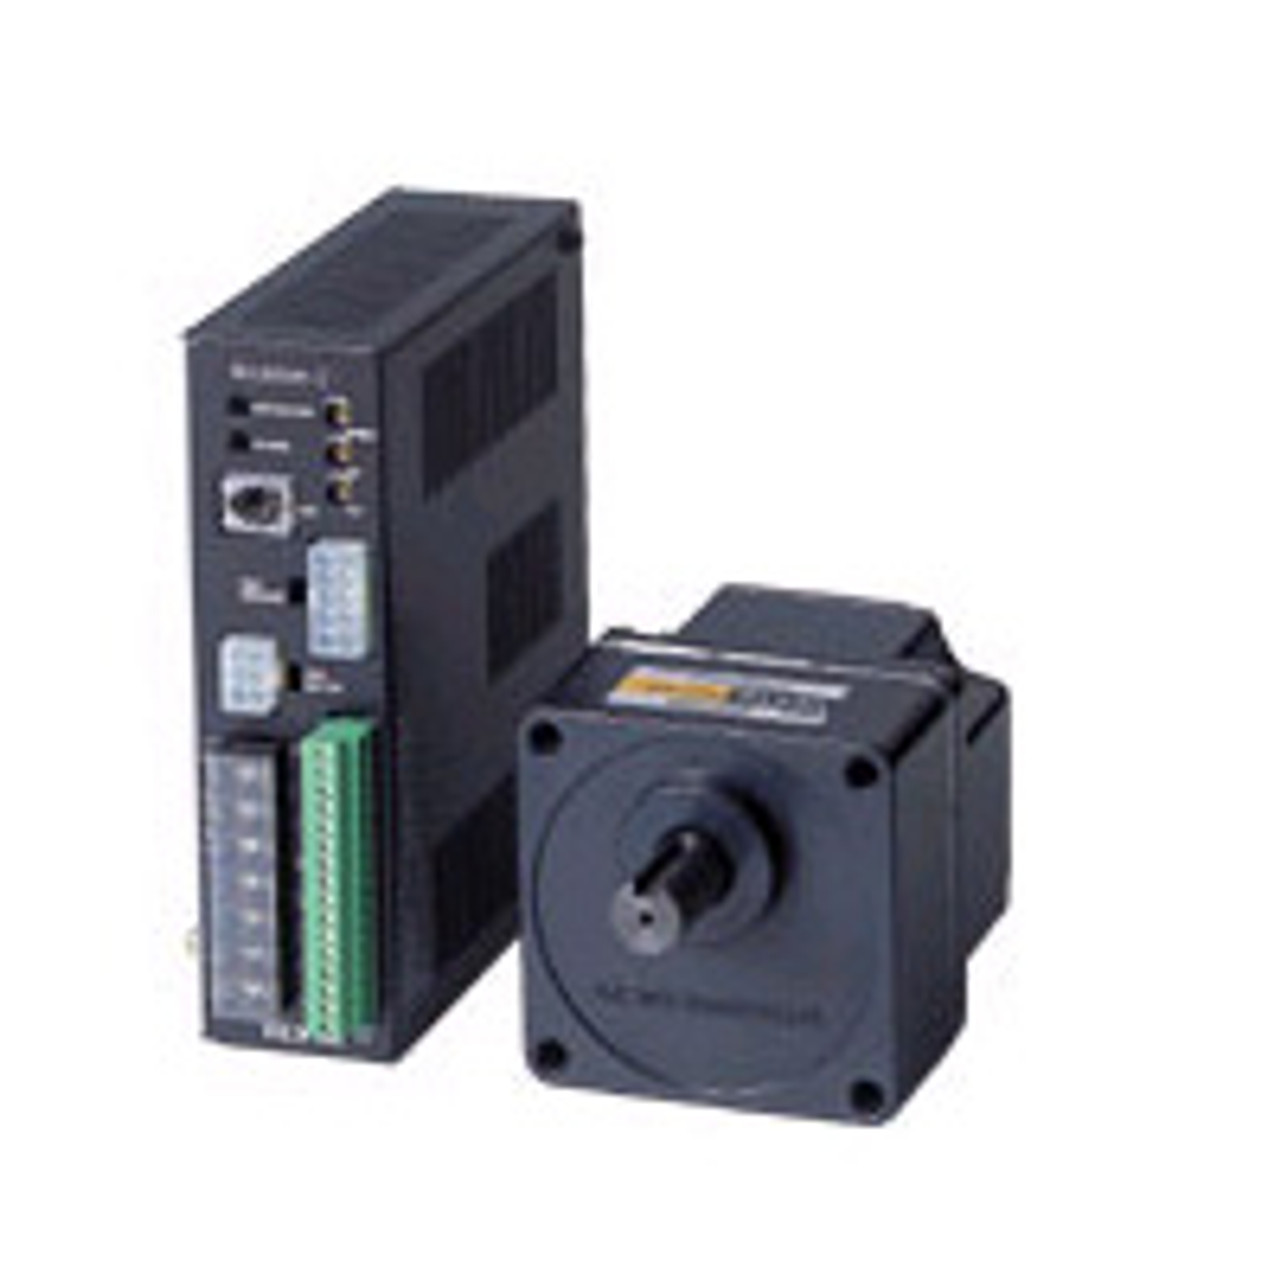 BX460A-200 - Product Image